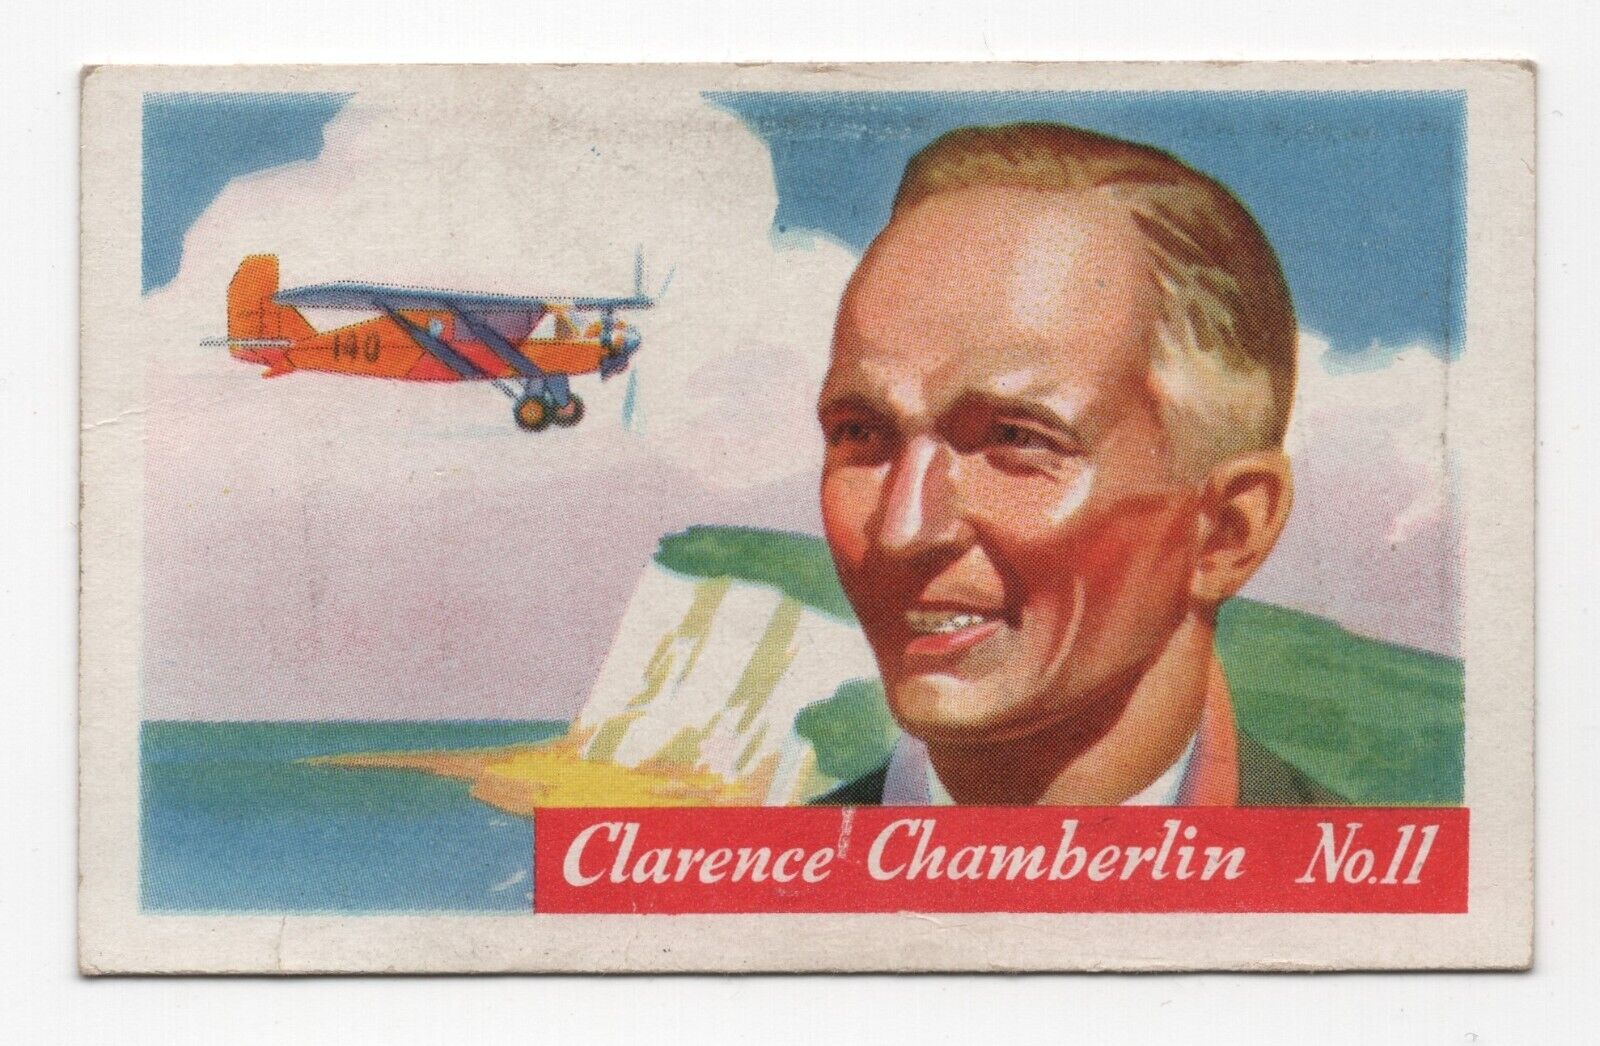 1936 Clarence Chamberlin Cereal Card F277 Heinz Famous Aviators 1ST Series Pilot